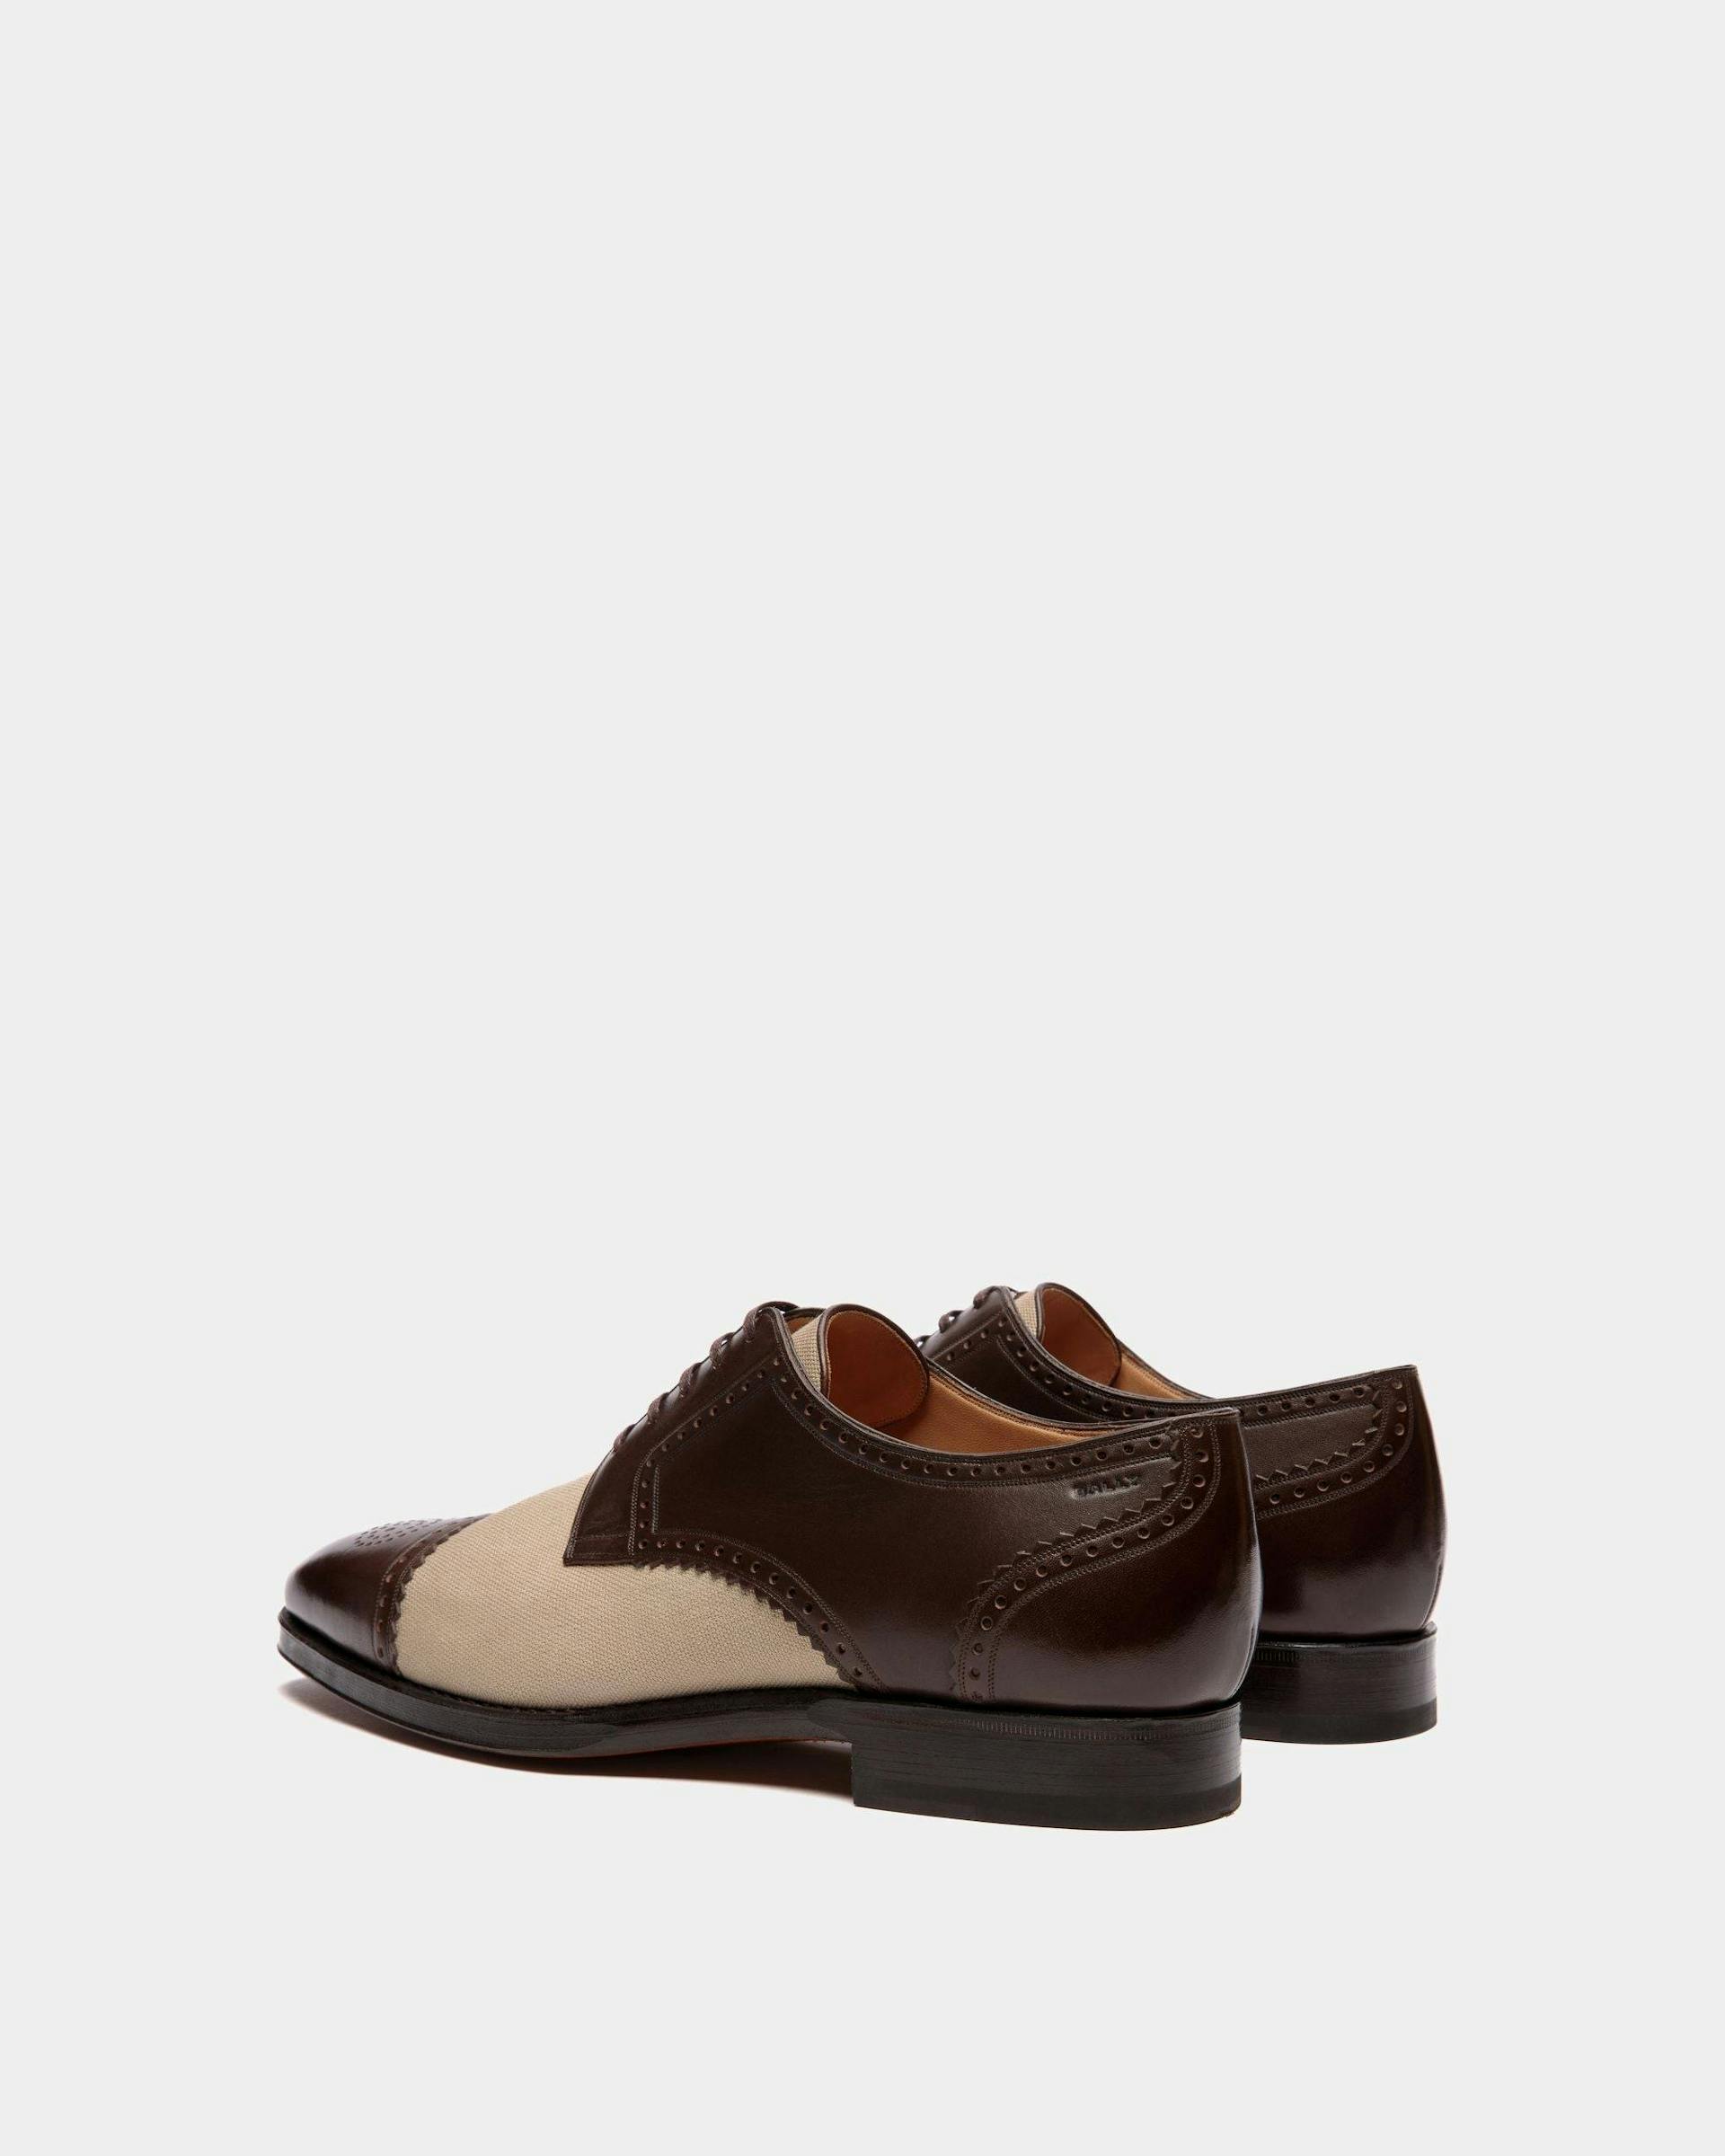 Men's Scribe Derby in Leather and Fabric | Bally | Still Life 3/4 Back